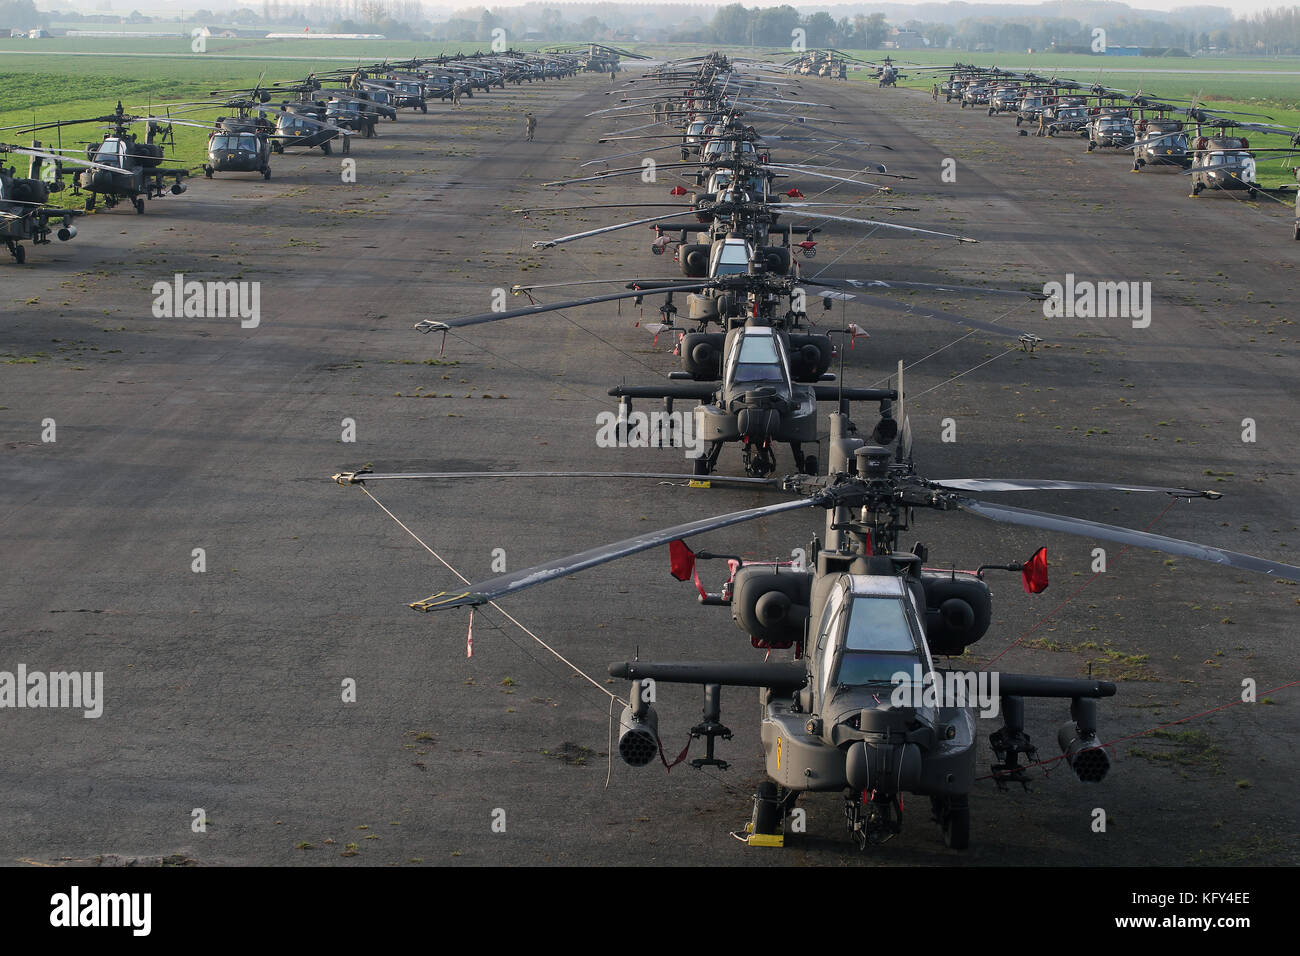 U.S. Army helicopters from the 1st Air Cavalry Brigade of the 1st Cavalry Division Fort Hood, Texas line the runway at Chievres Air Base Belgium Stock Photo